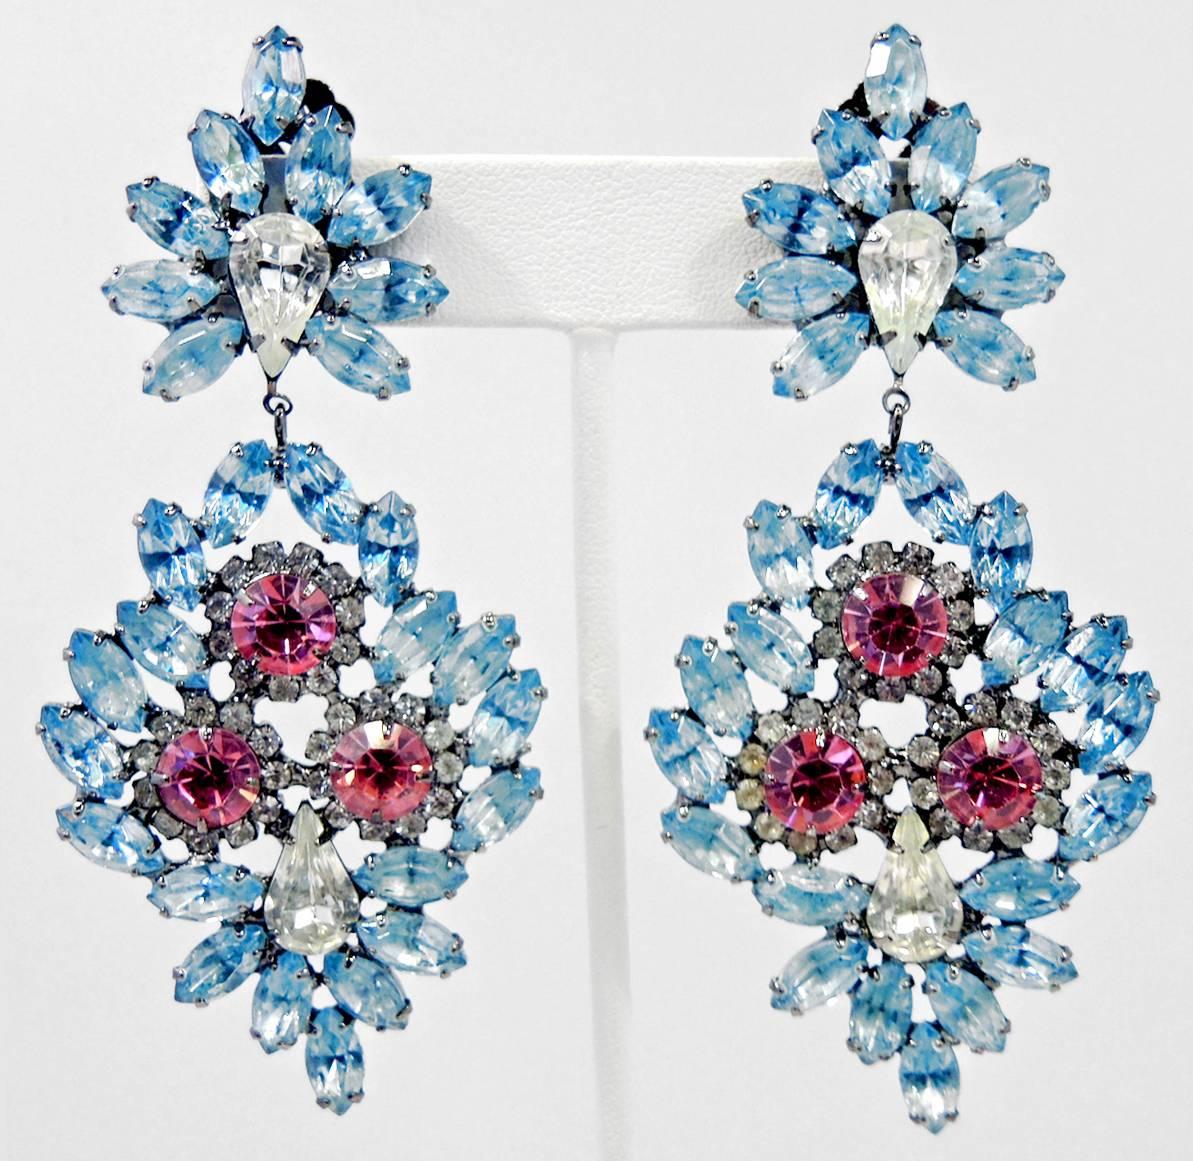 These Kenneth Jay Lane dangling earrings are absolutely stunning. The top has blue rhinestones encircling a brilliant clear teardrop clear center.  The bottom has a combination of blue and clear rhinestones with three large round pink rhinestones in